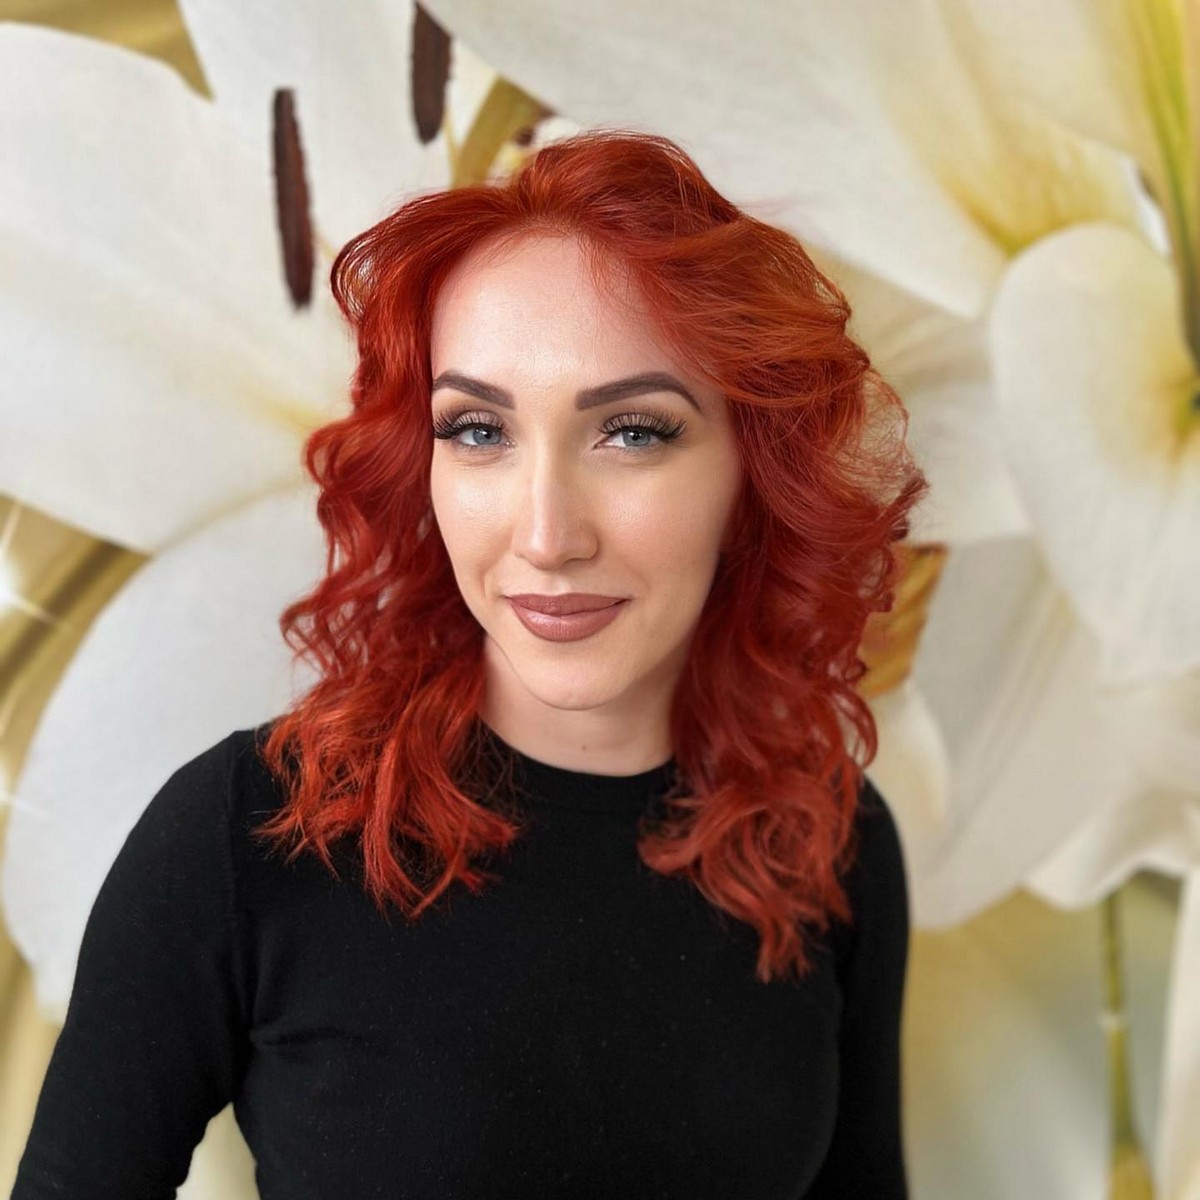 Fiery Red on Curly Hair